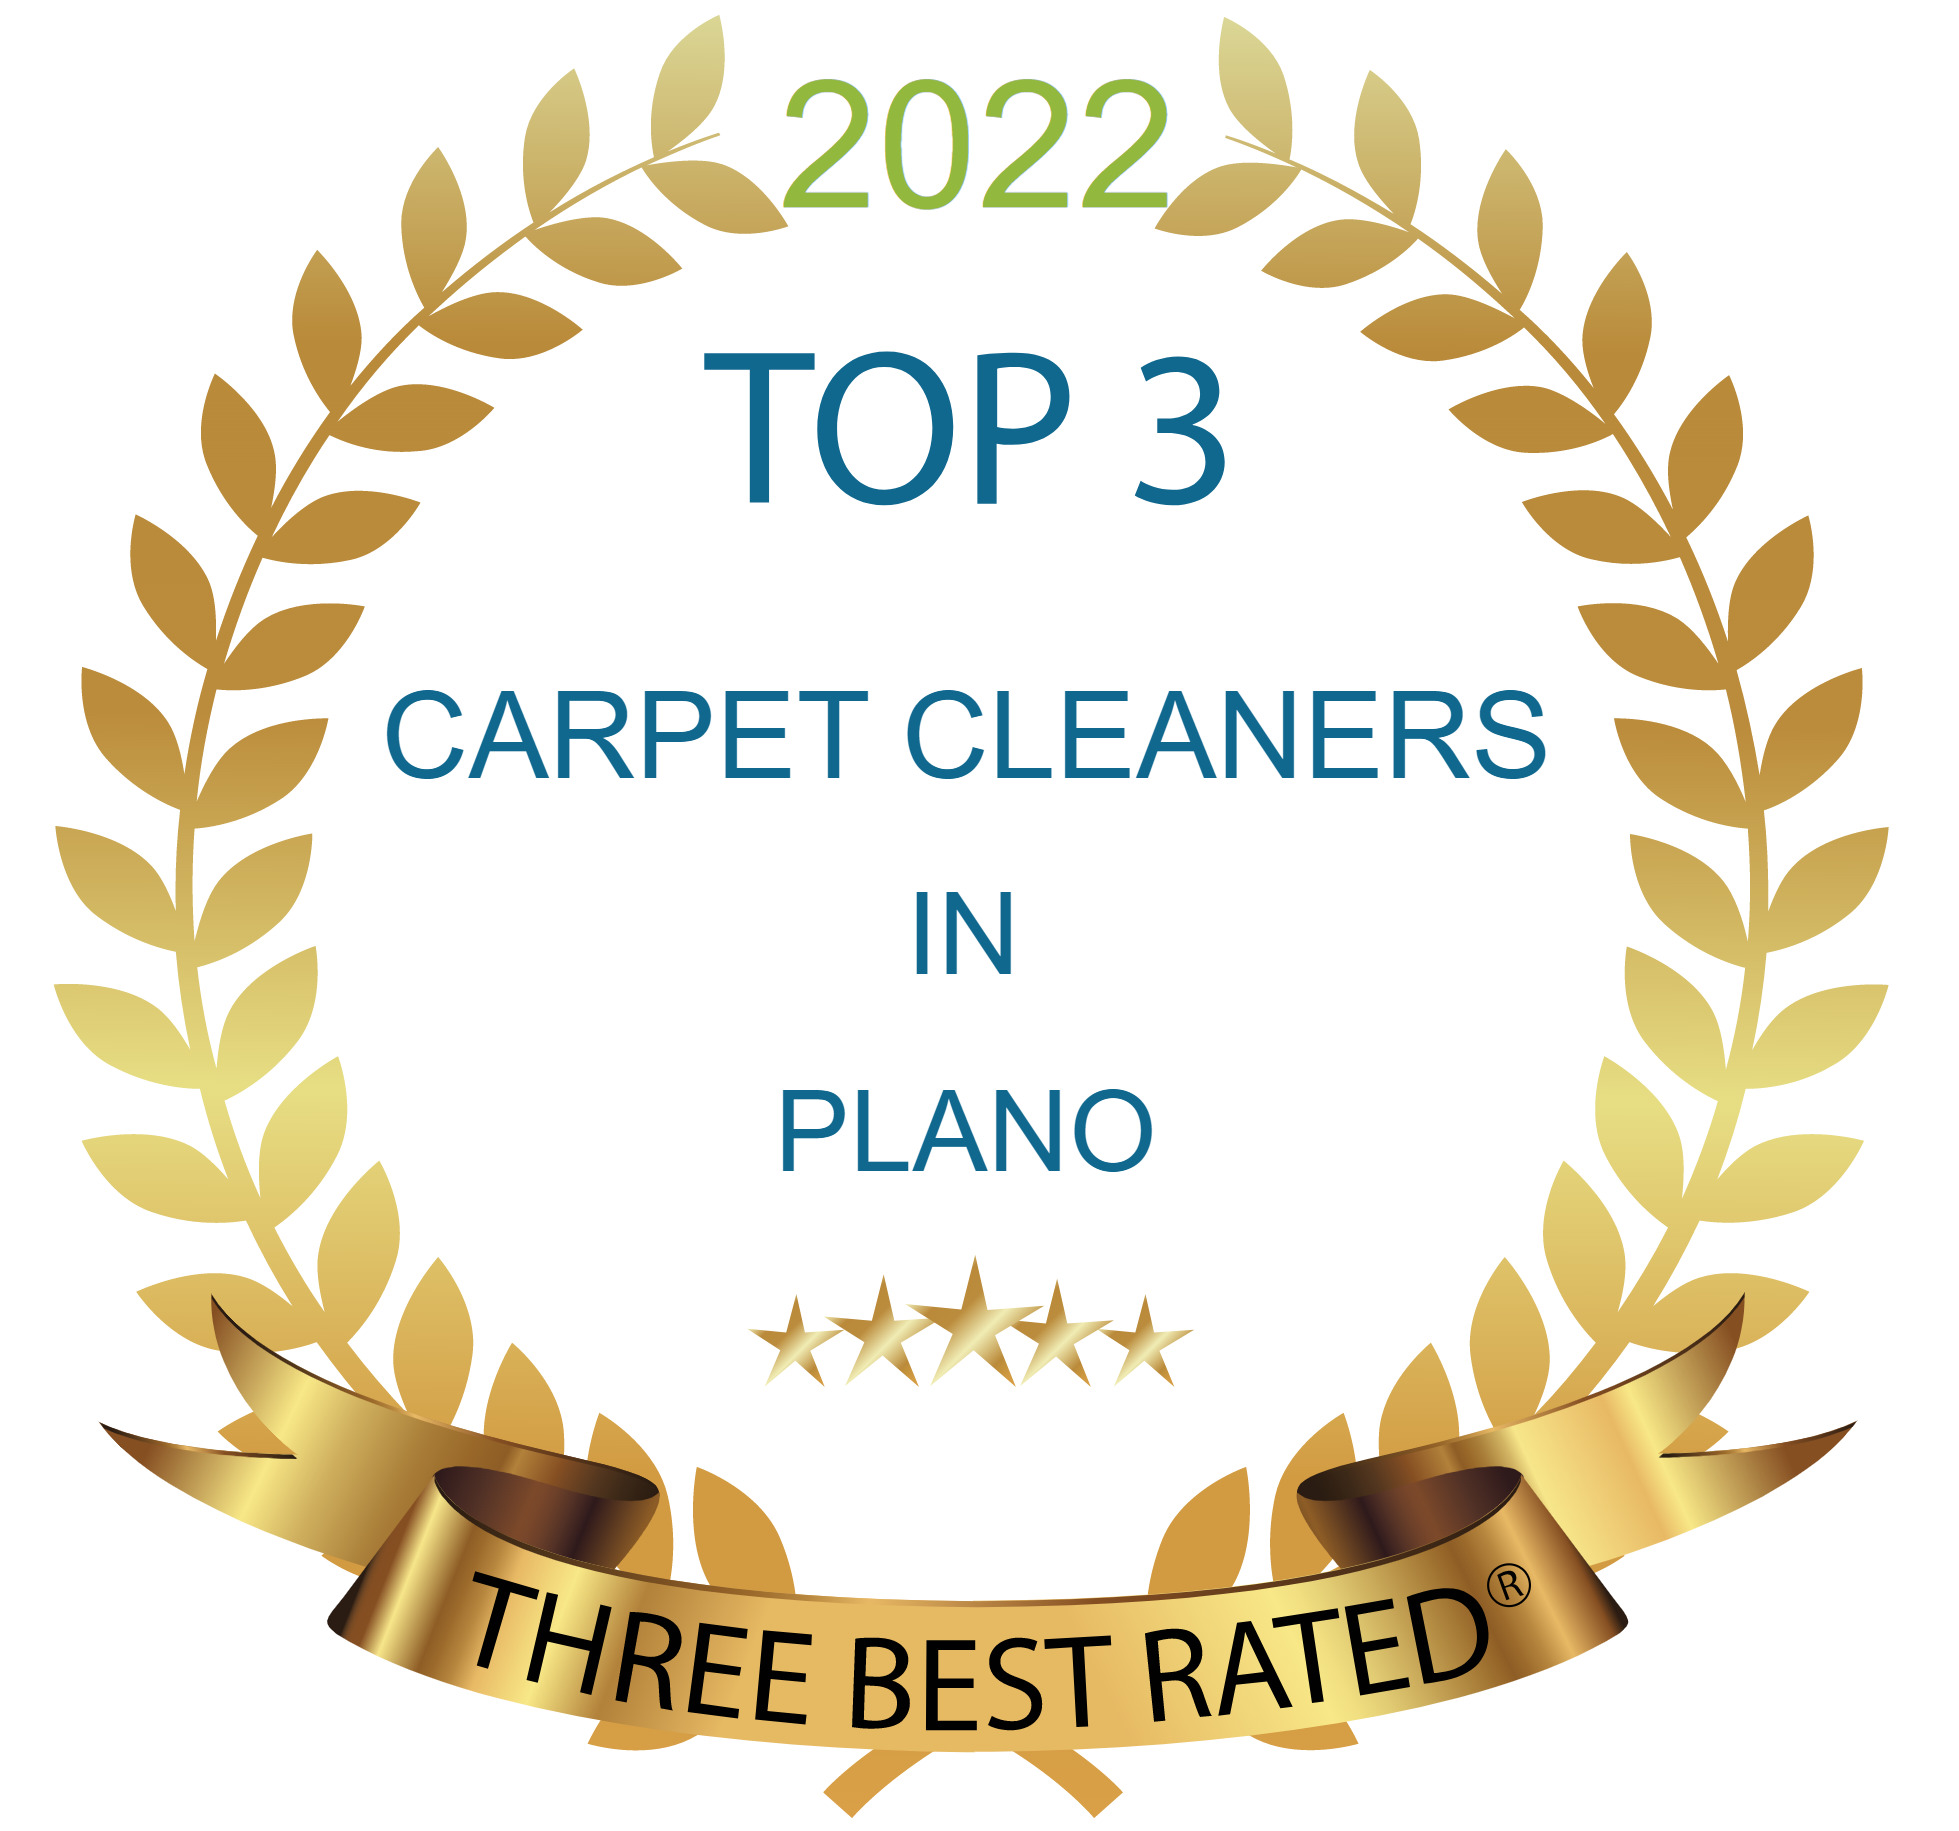 2022 Top 3 Carpet Cleaners in Plano